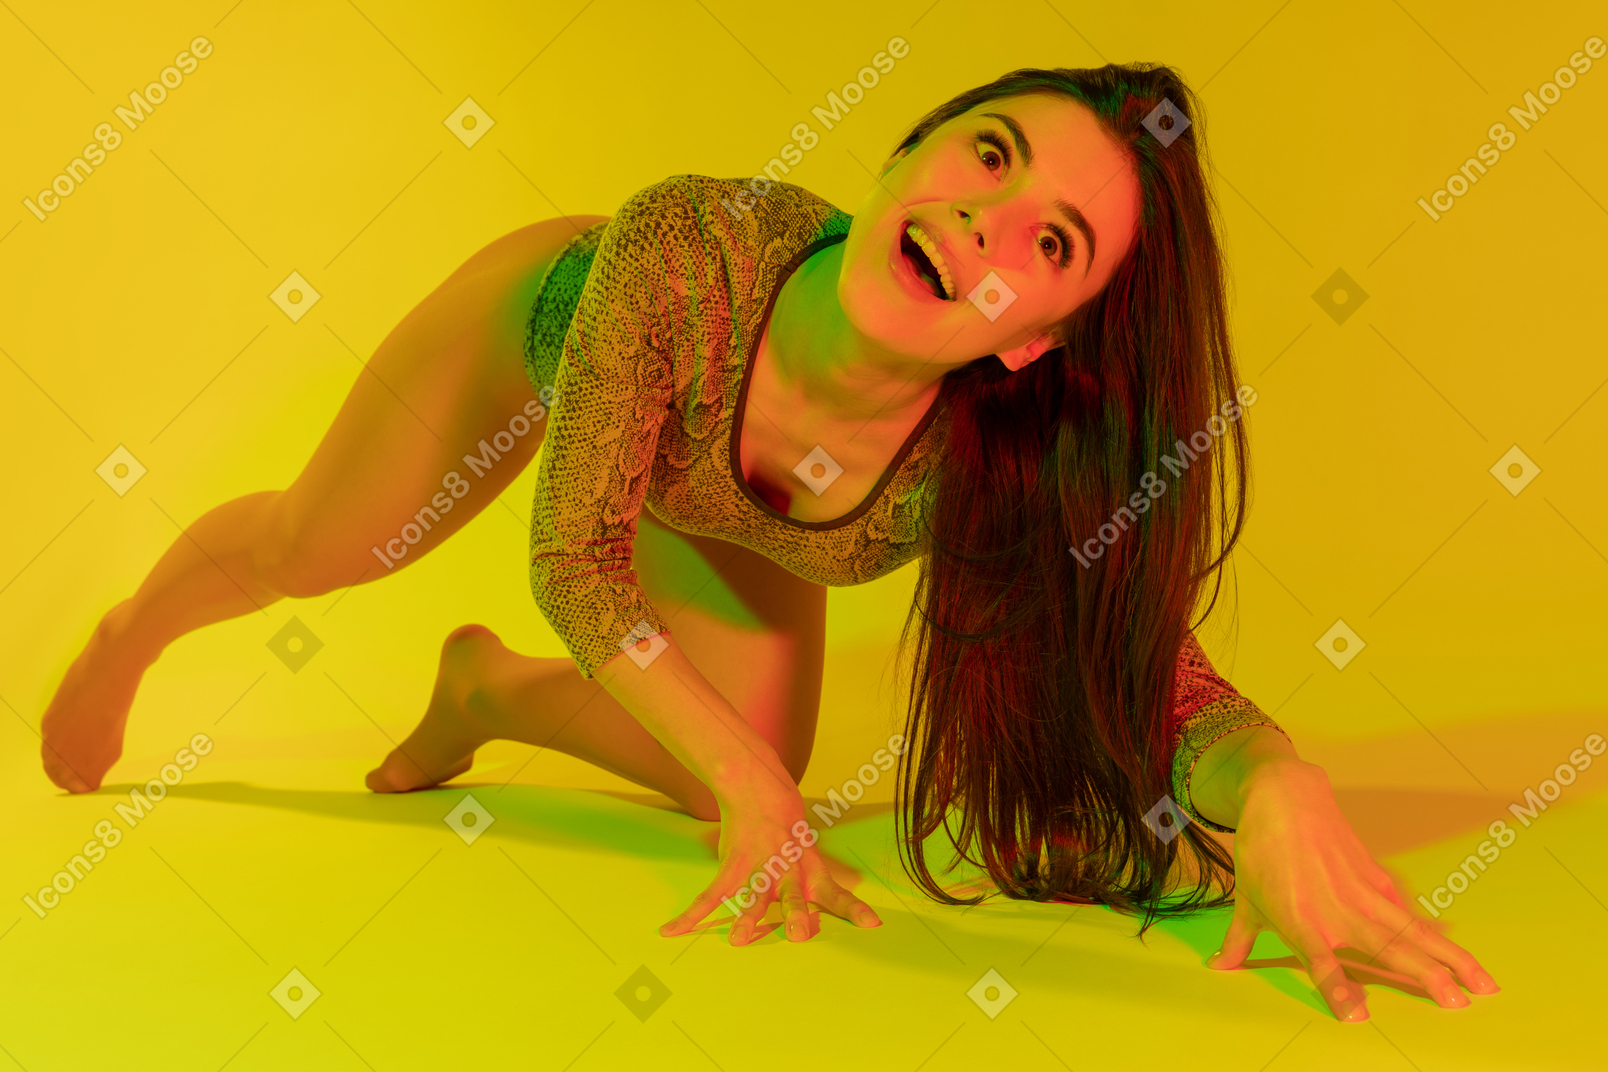 Cheerful female standing on all fours